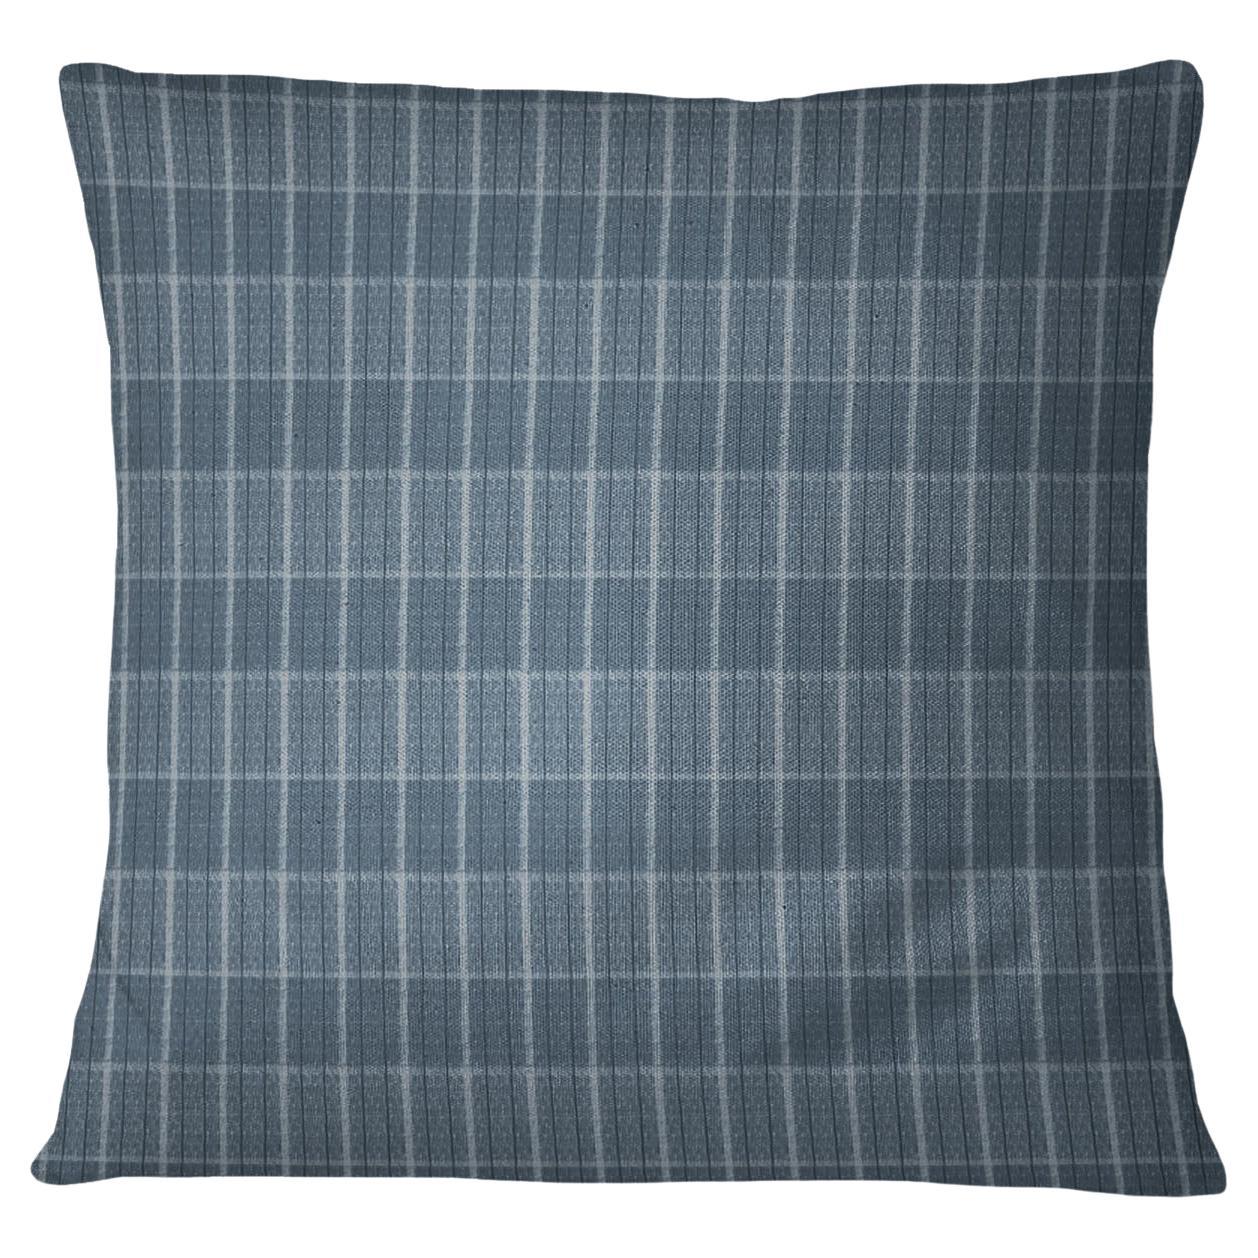 Checkmate Polyester Throw Pillows Set of 2 in Color Denim For Sale